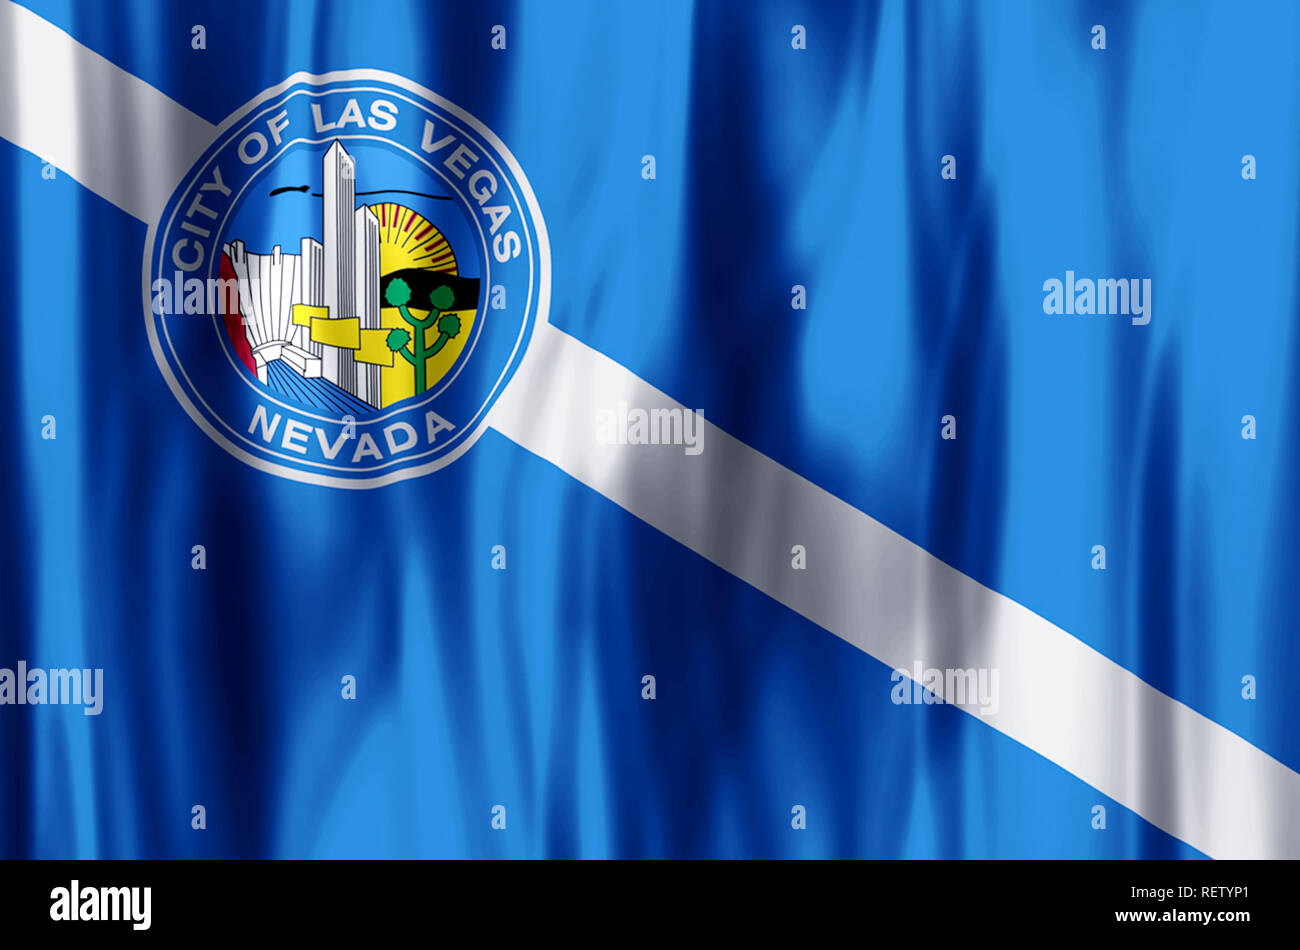 Las Vegas Flag High Resolution Stock Photography and Images - Alamy